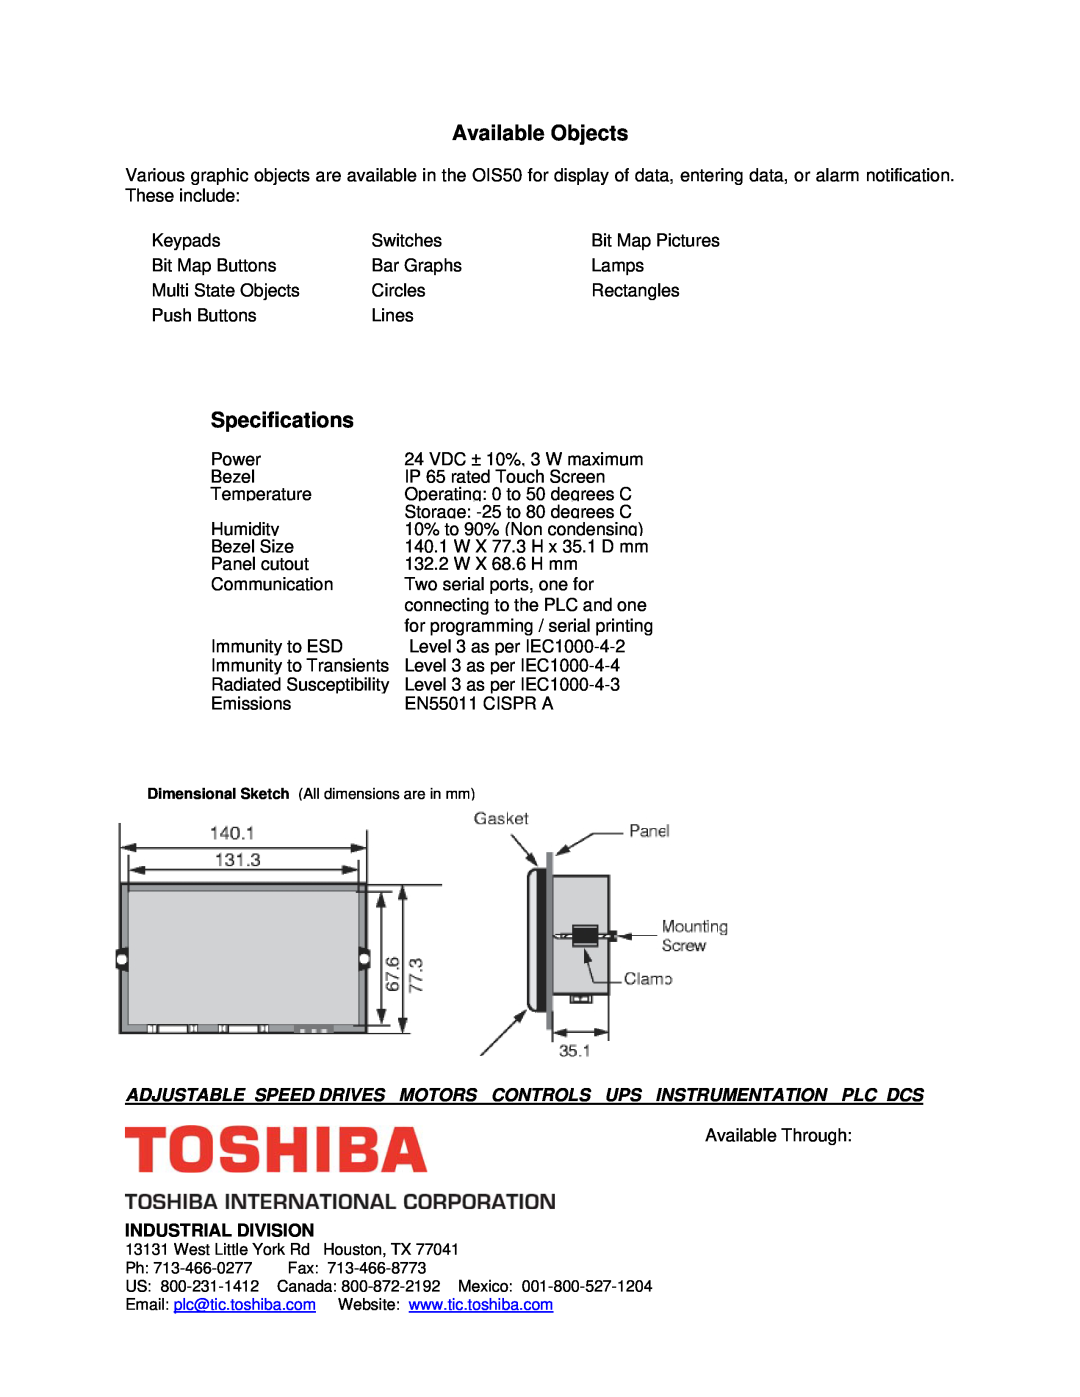 Toshiba OIS50 manual Available Objects, Specifications, Adjustable Speed Drives Motors Controls Ups Instrumentation Plc Dcs 